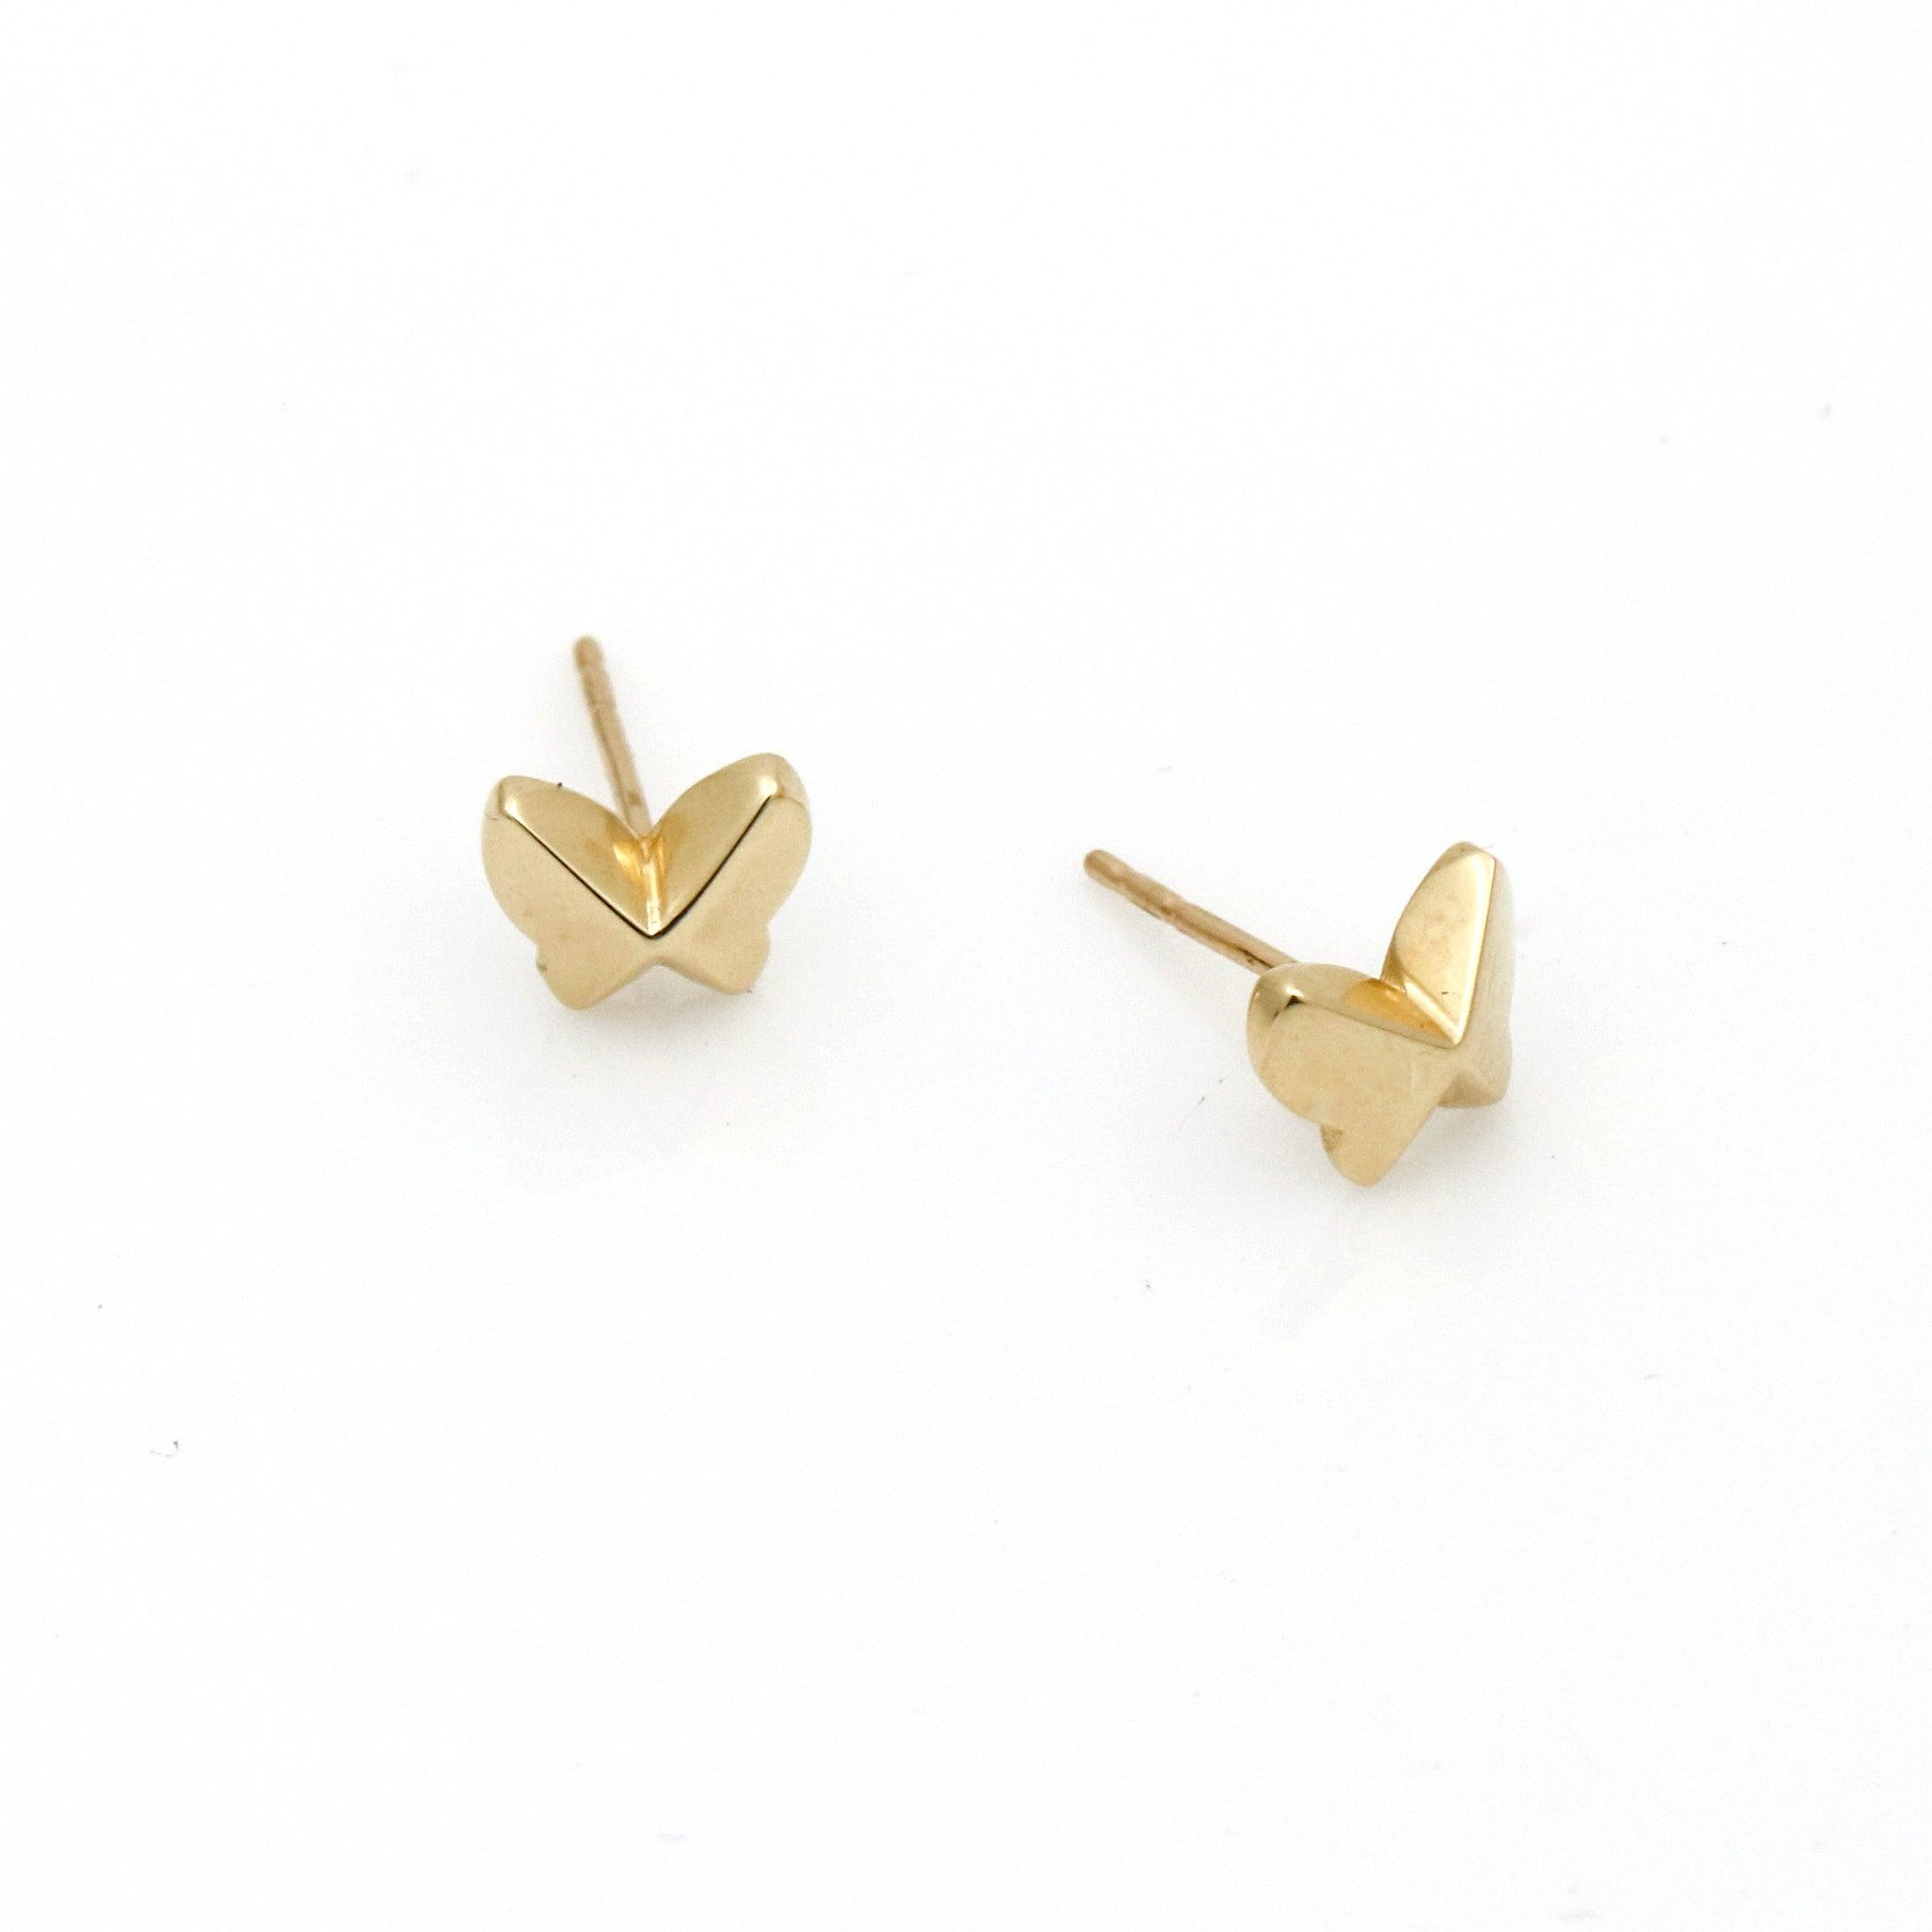 Small Gold Stud Earrings, 4mm Little Gold Zircon Earrings, Women Gold  Plated Stone Solitaire Studs Jewelry, Square Tiny Girls Sparkly Posts -  Etsy Israel